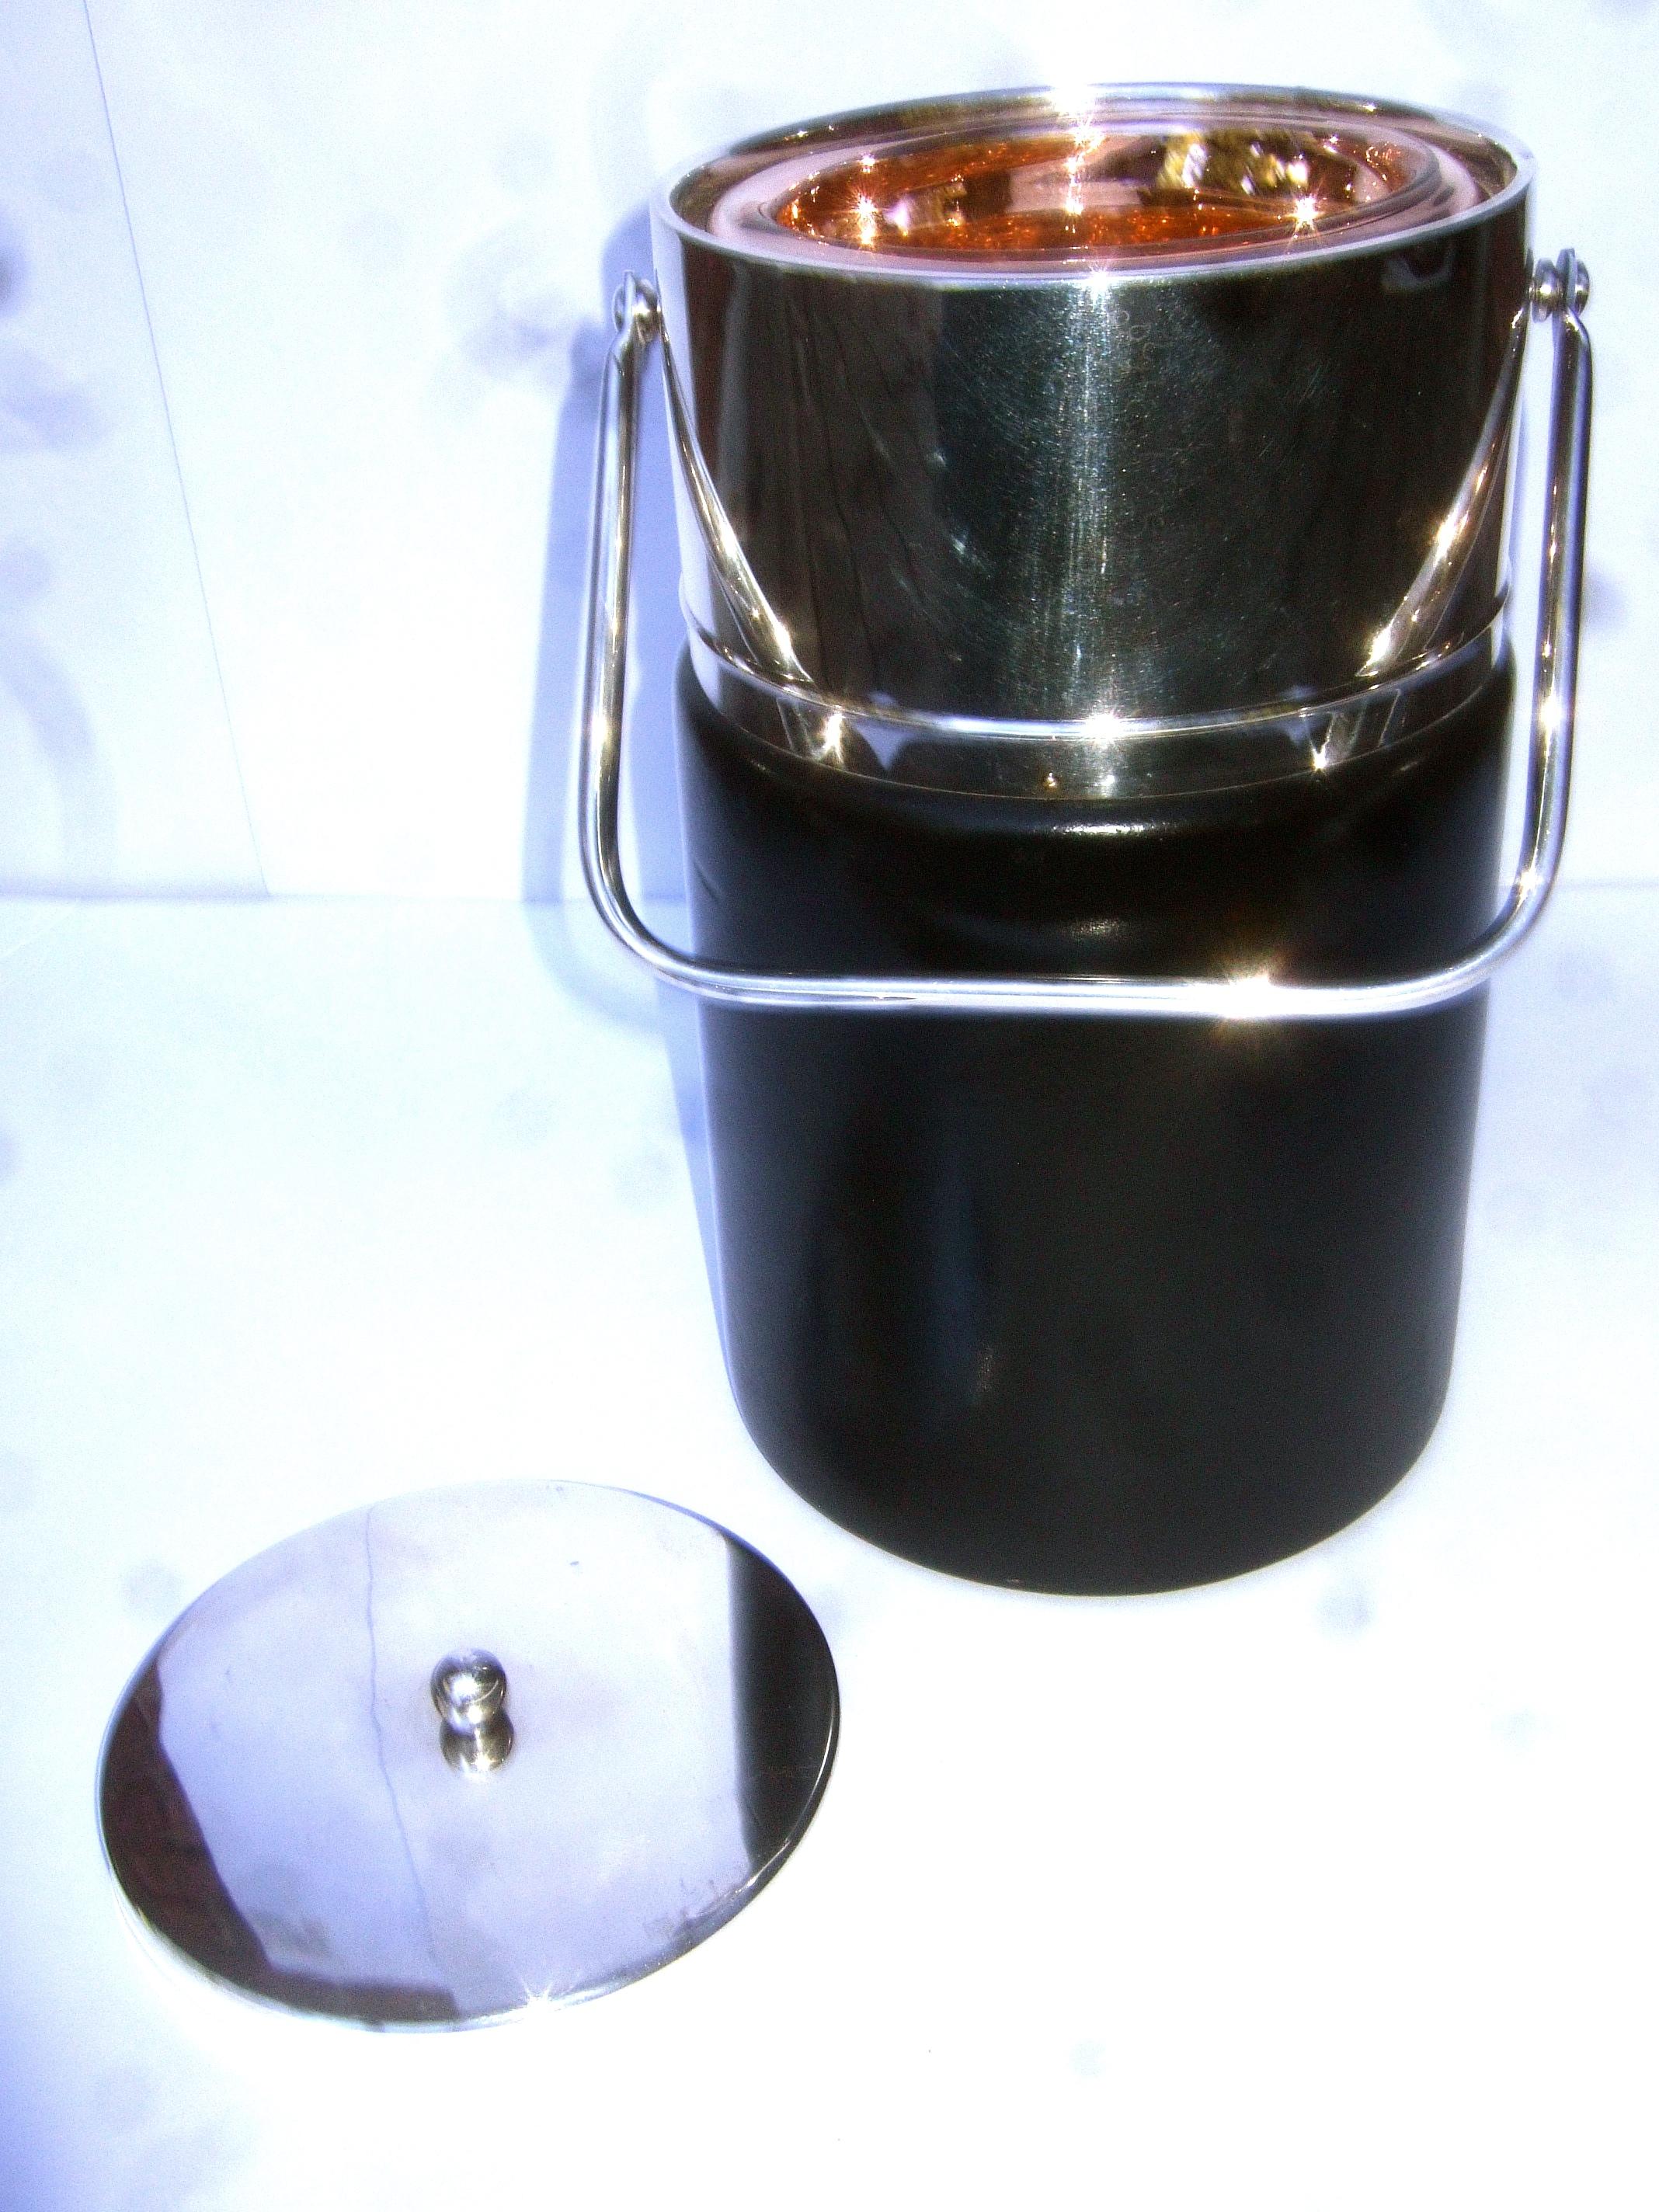 Gucci Italy Sleek Chrome Black Leather Ice Bucket c 1970s For Sale 2